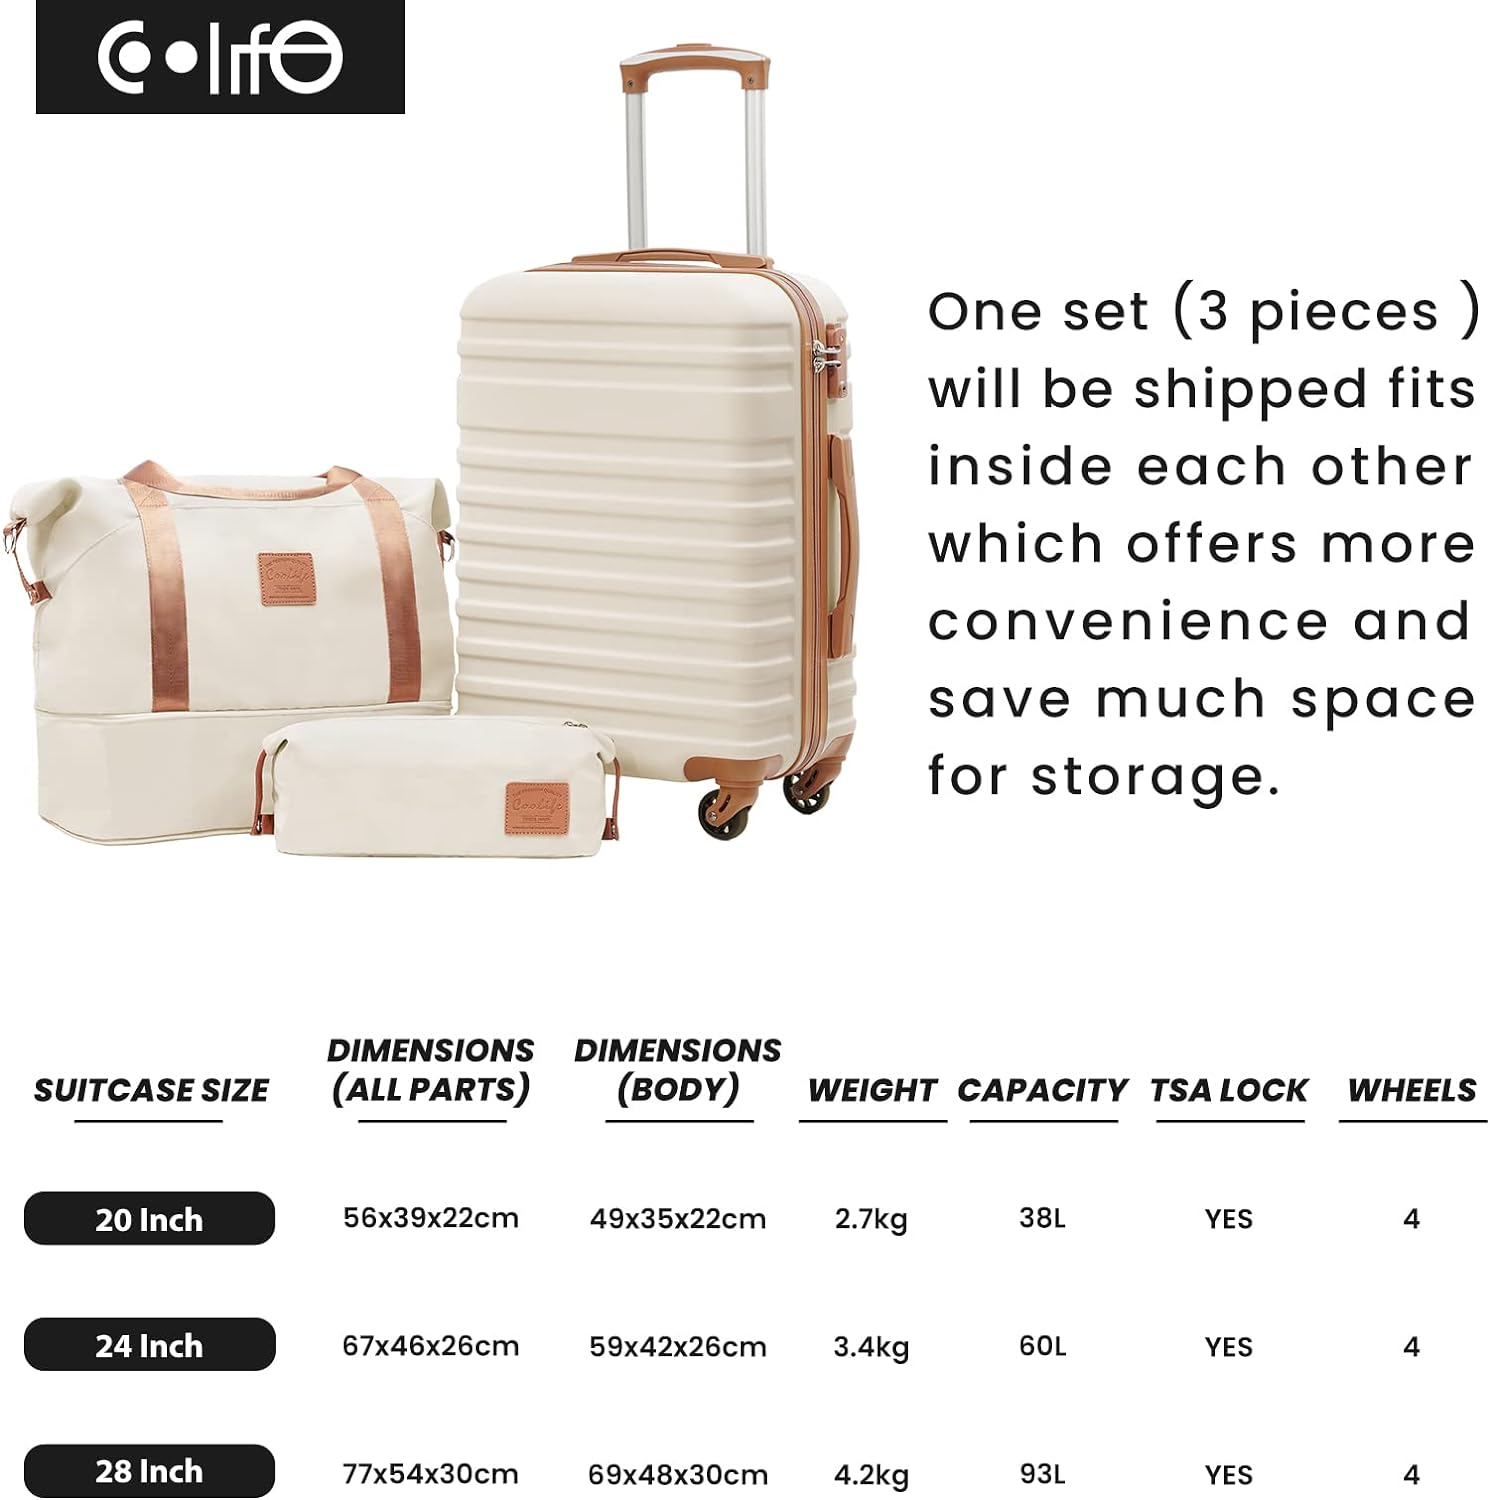 COOLIFE Suitcase Trolley Carry On Hand Cabin Luggage Hard Shell Travel Bag Lightweight with TSA Lock,The Suitcase Included 1pcs Travel Bag and 1pcs Toiletry Bag (White/Brown, 28 Inch Luggage Set)